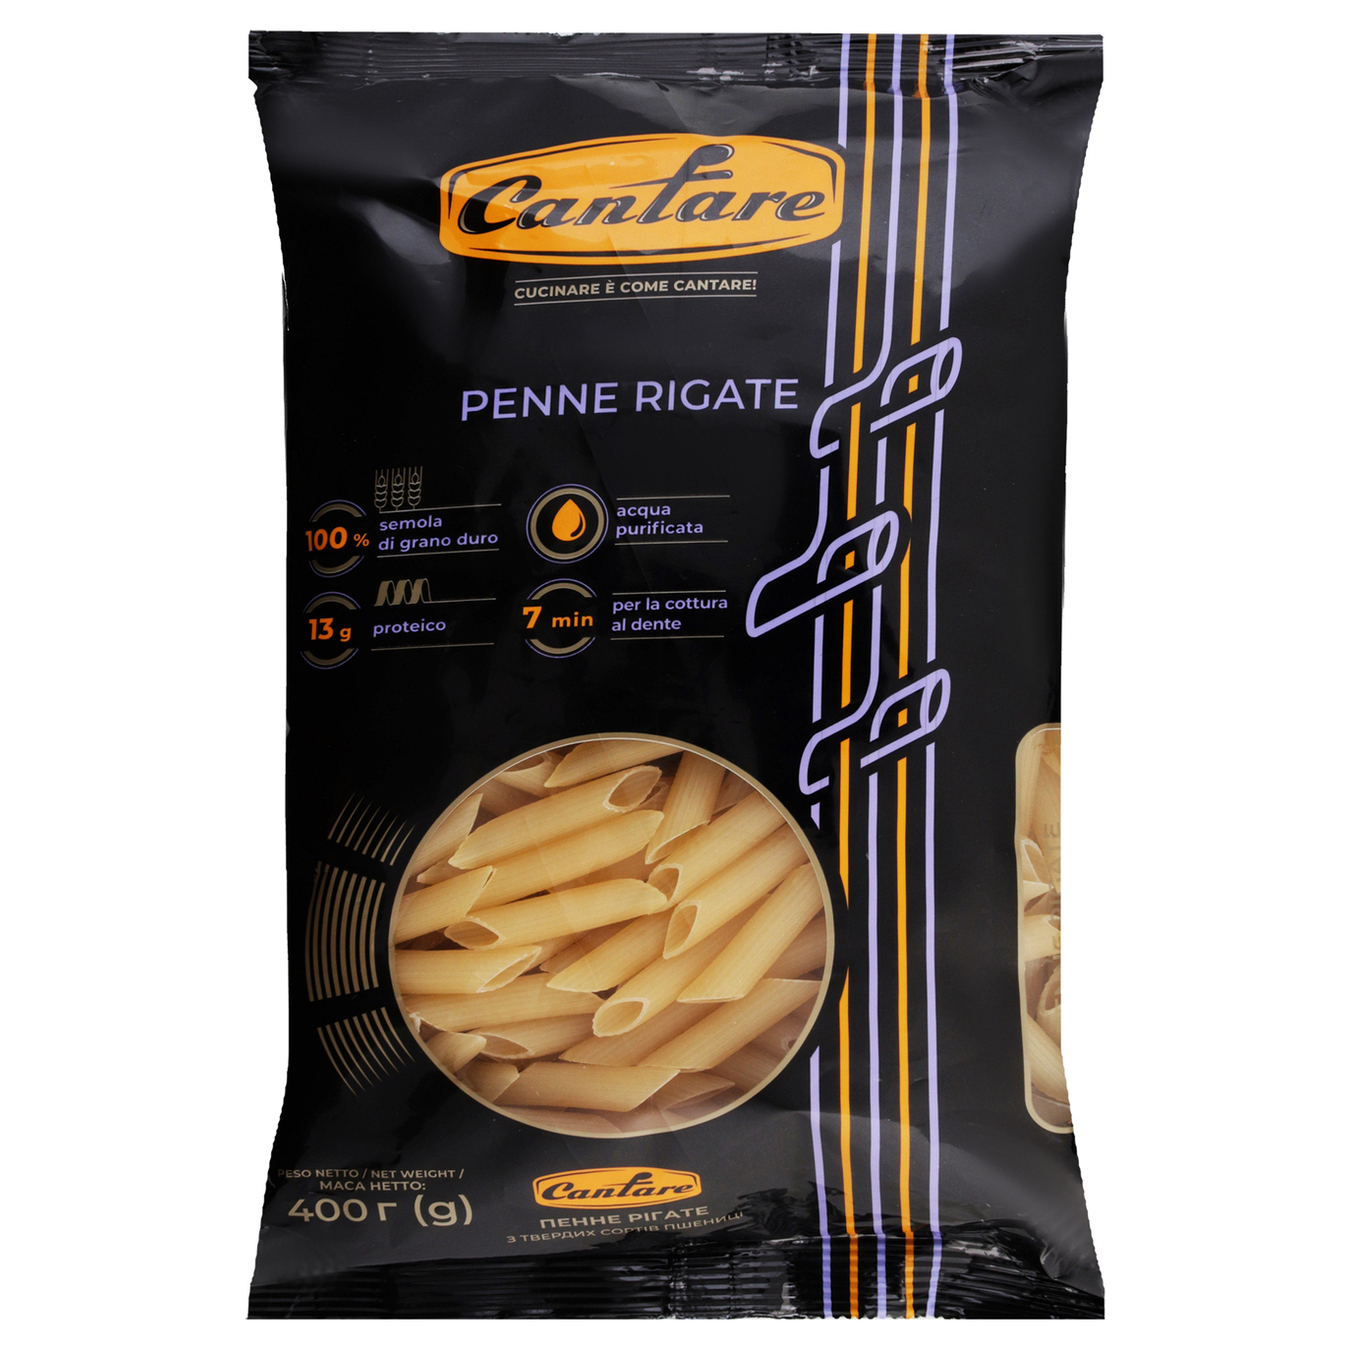 Cantare Pasta products Penne Rigate 400g